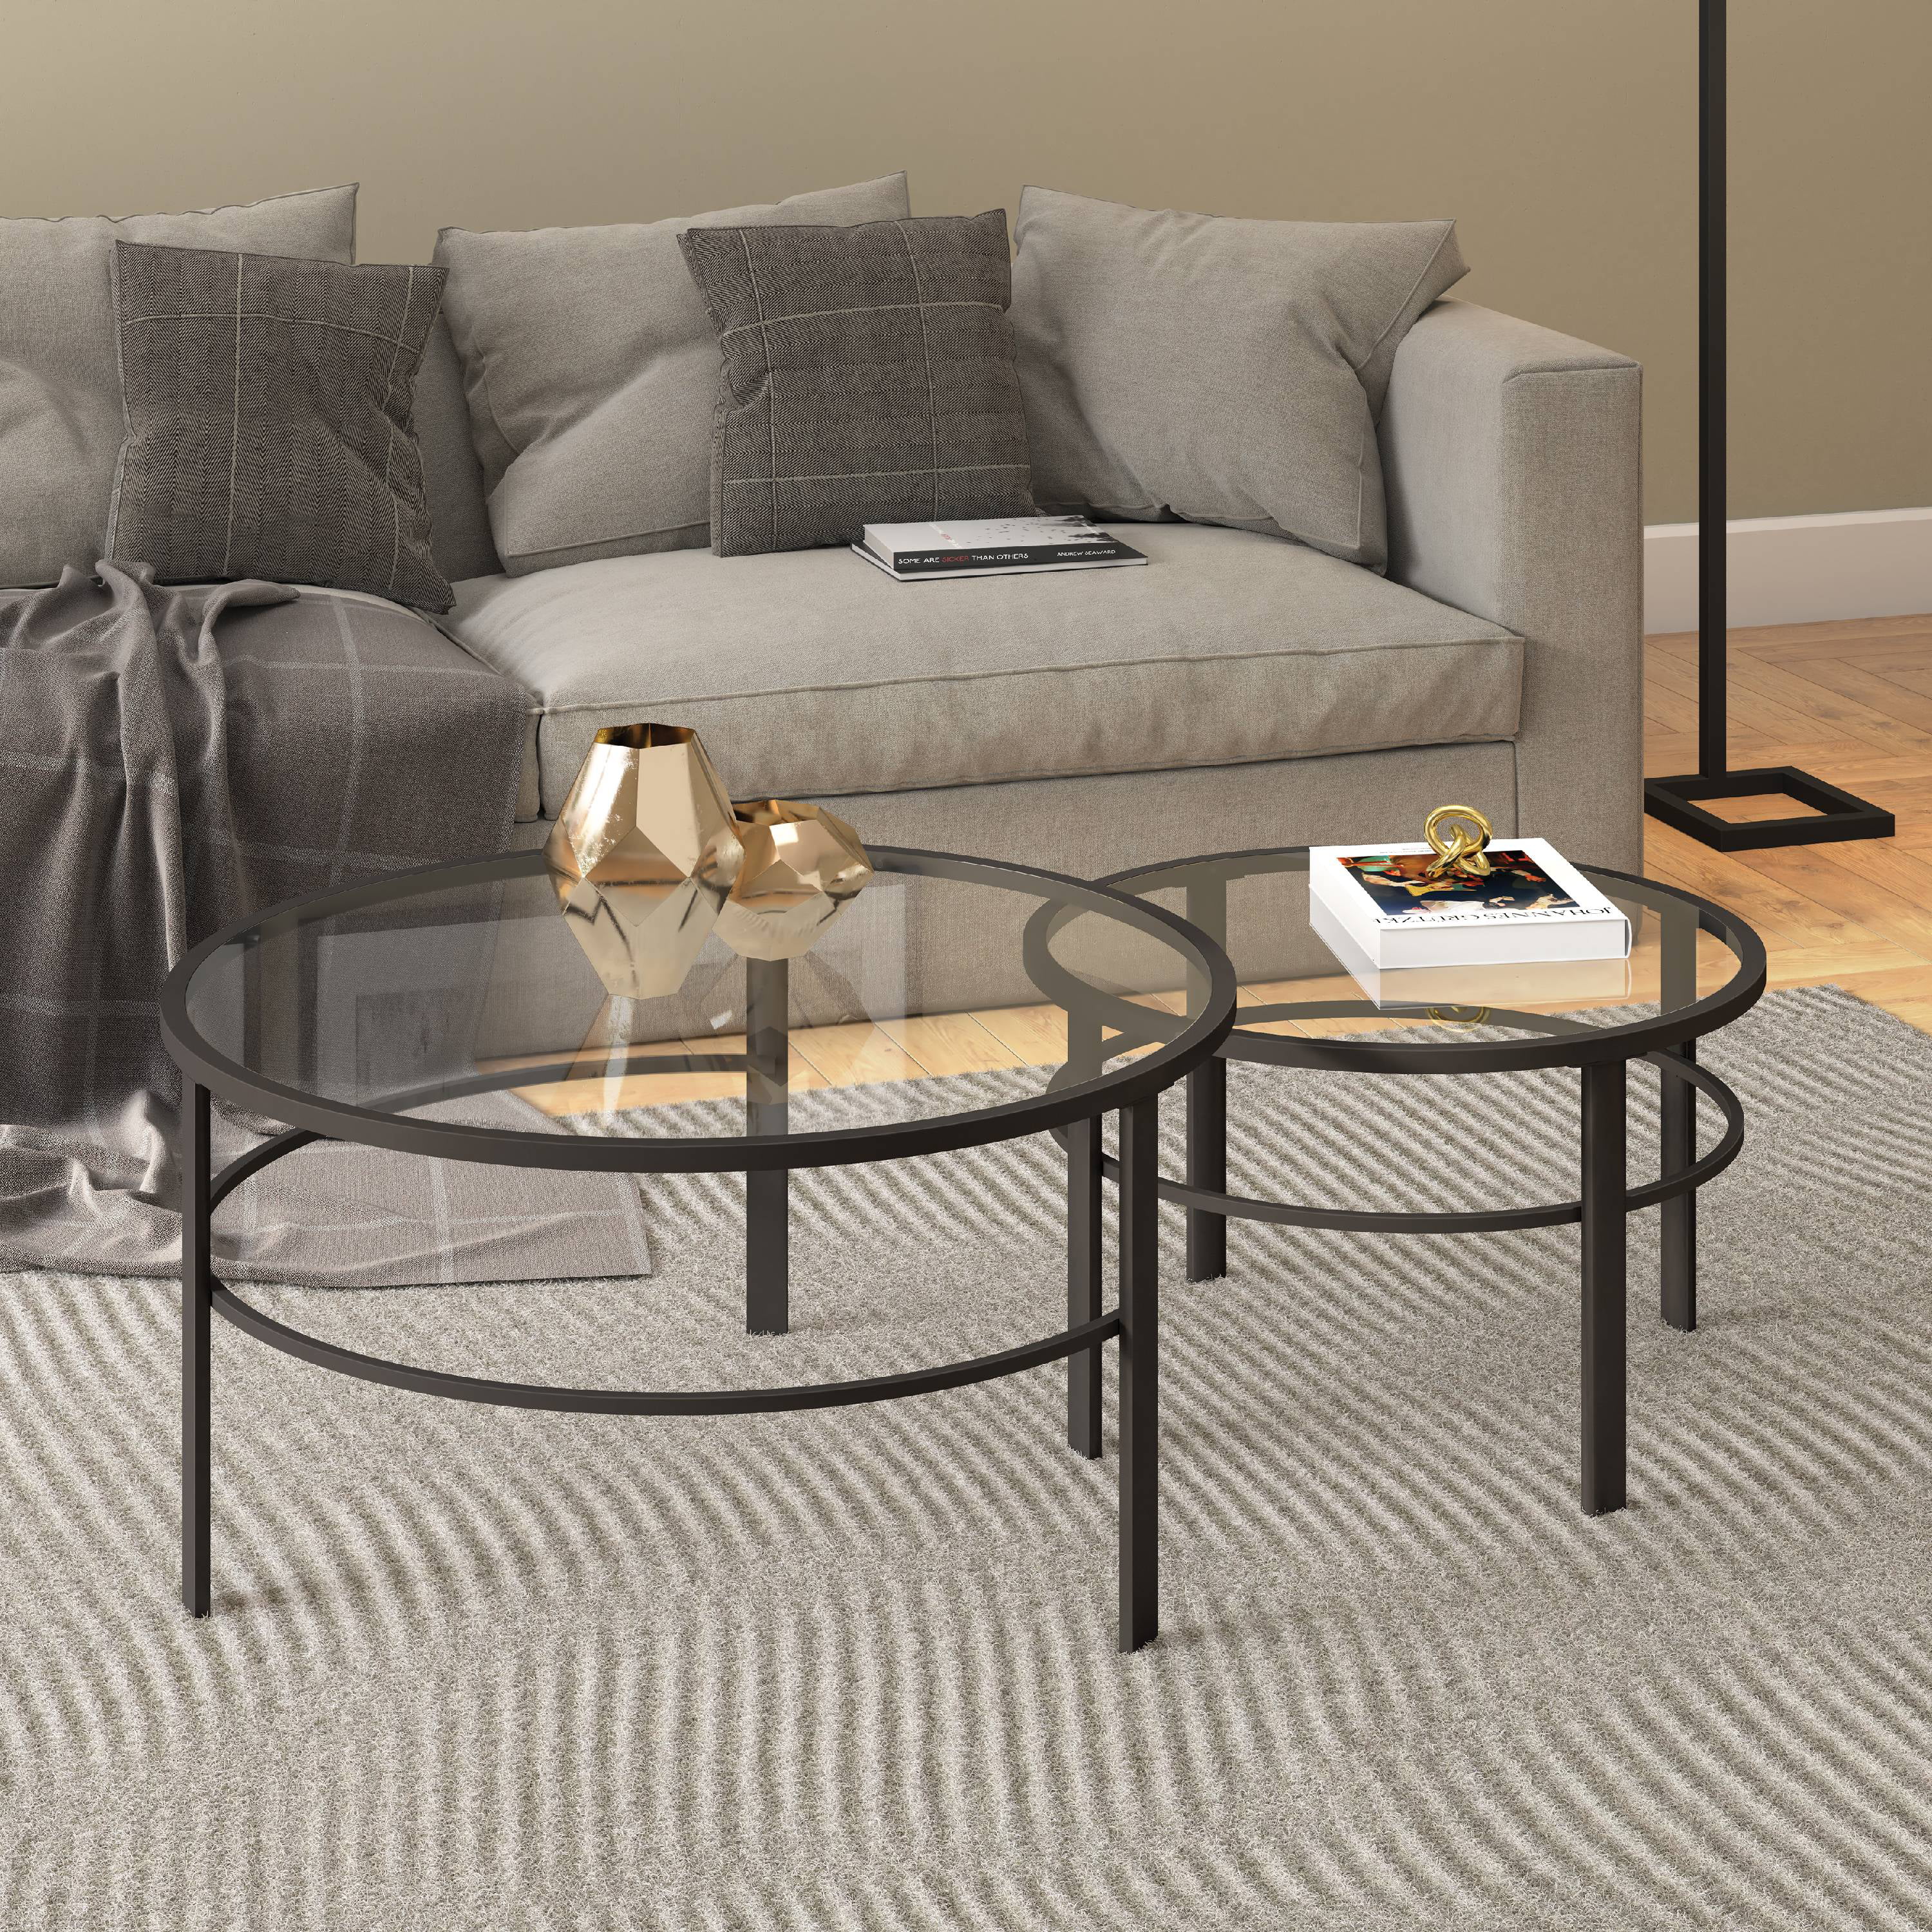 Contemporary Glass Coffee Tables For A Sleek Look